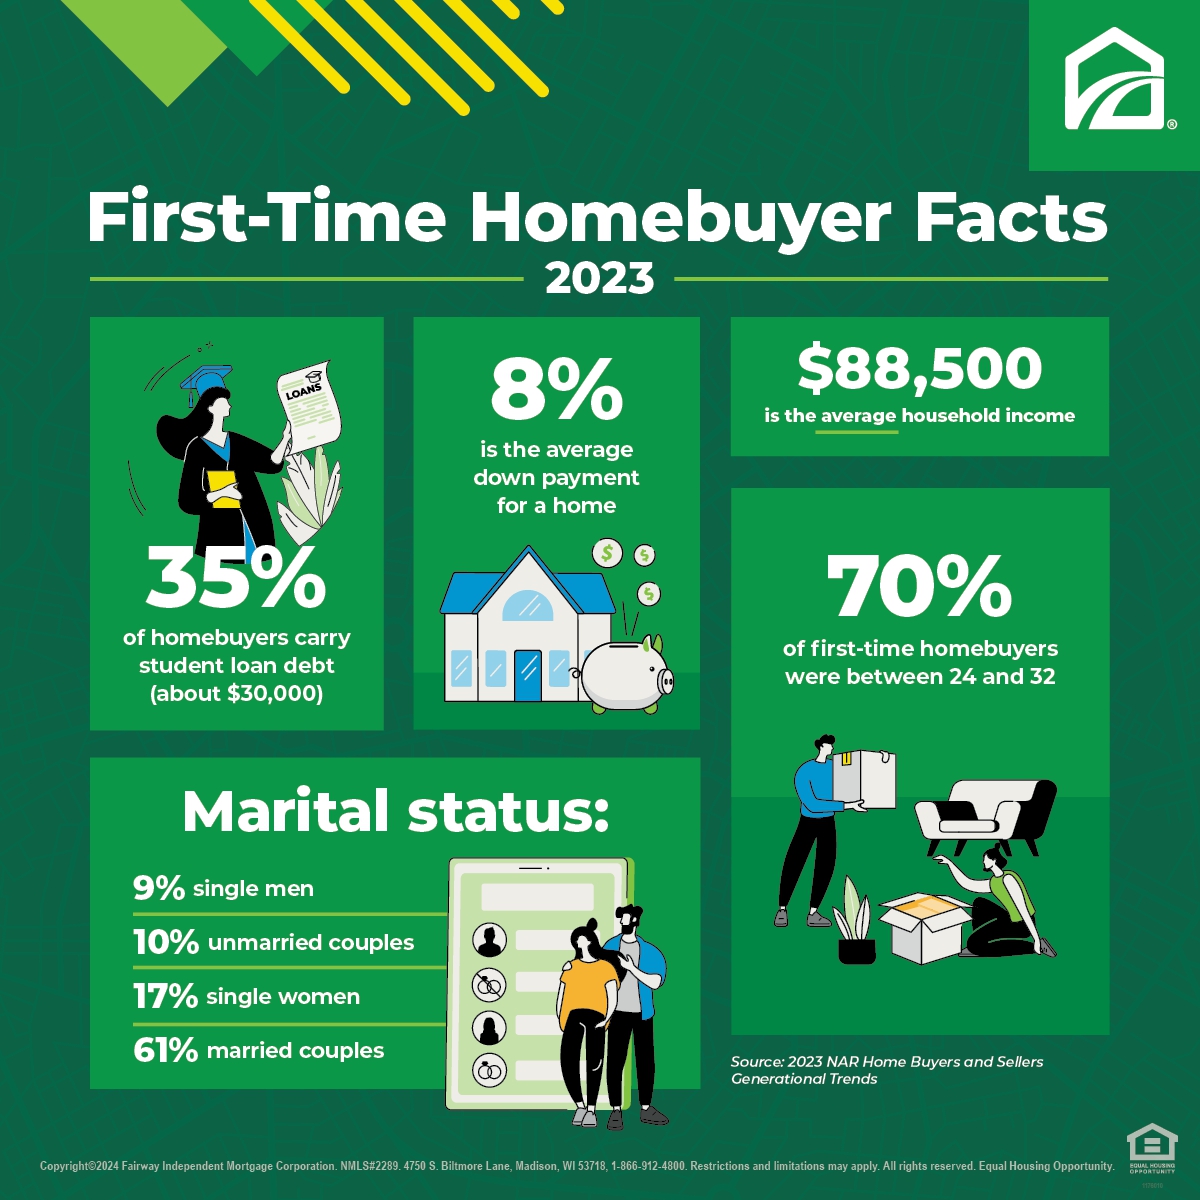 2023 was a year of massive changes when it comes to buying a home. Check out the latest demographic breakdown on homebuyers in 2023 by the National Association of REALTORS®.
#firsttimehomebuyer #homepurchase #utrealestate